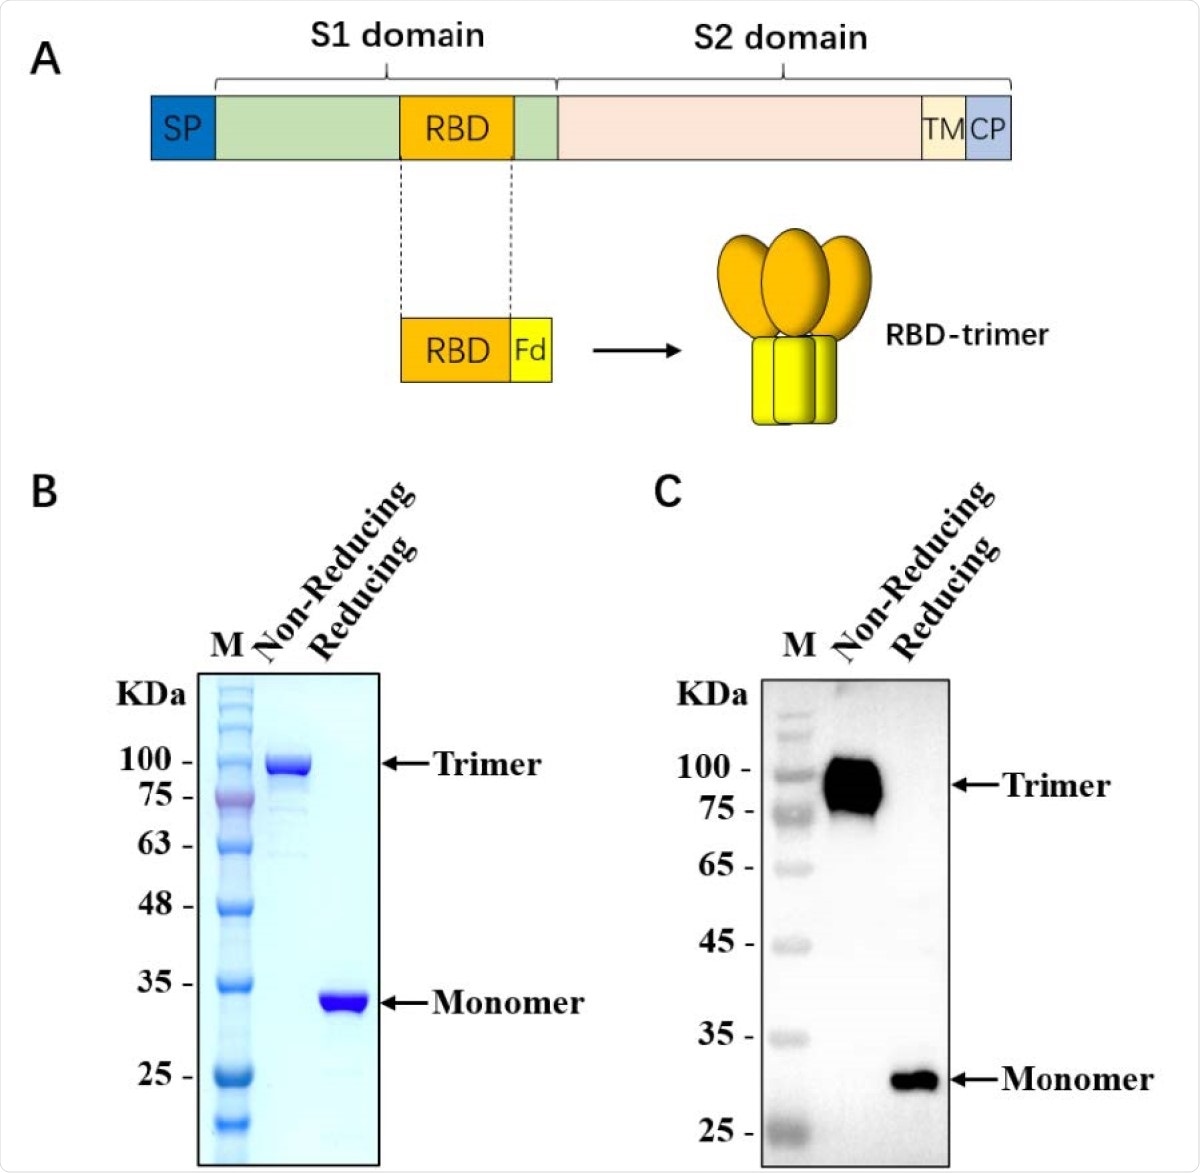 Characterization of SARS-CoV-2 RBD-trimer.(A) Schematic design of SARS-CoV-2 RBD-trimer. (B-C) The purified recombinant 330 protein was analyzed by SDS-PAGE (B) and Western blot with a polyclonal antibody against SARS-CoV-2-S1 (C). M: Marker. 10 µg of recombinant protein was loaded in each lane.